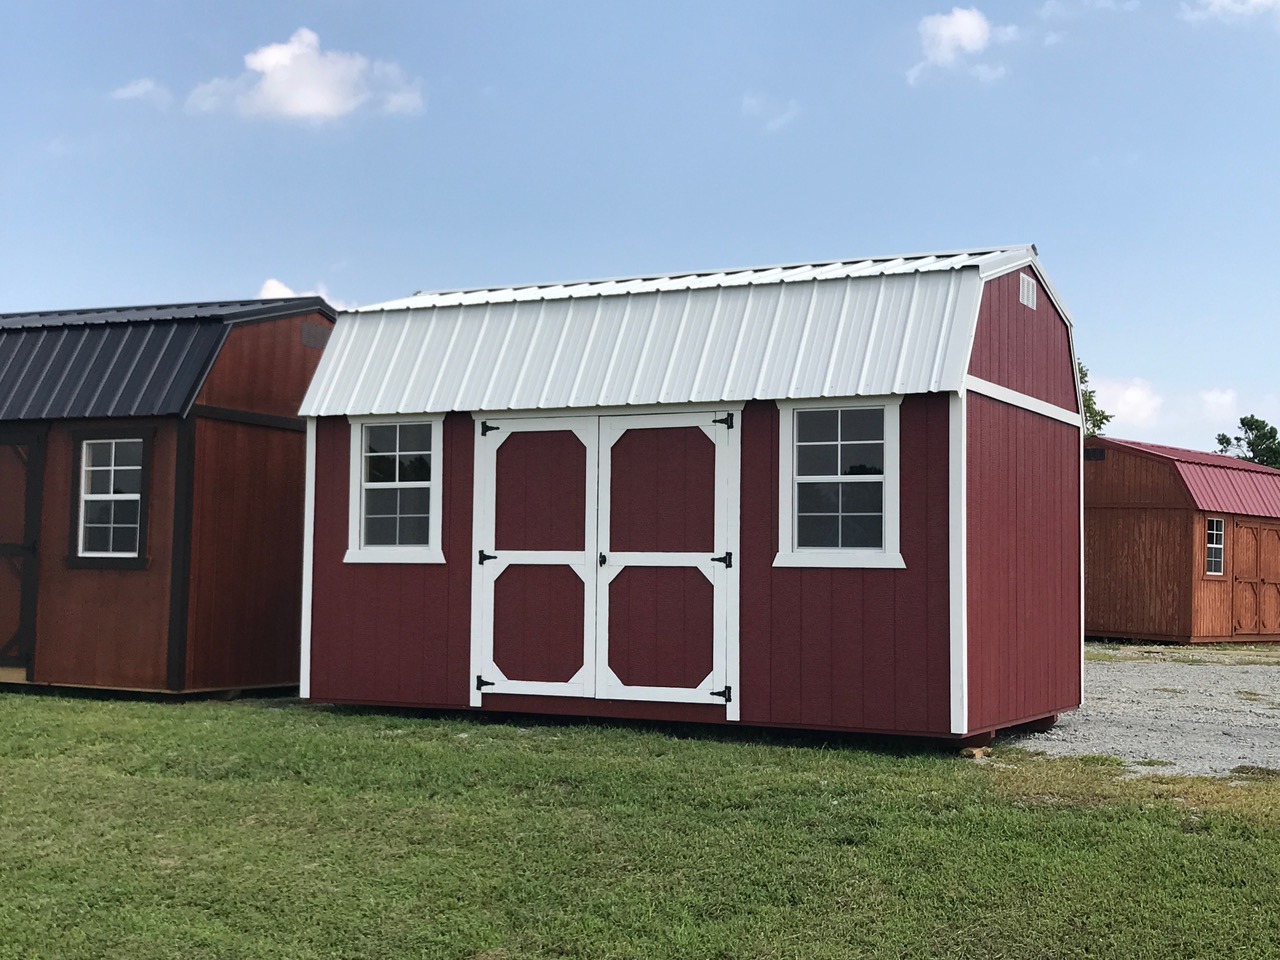 Red express series side lofted barn with white trim